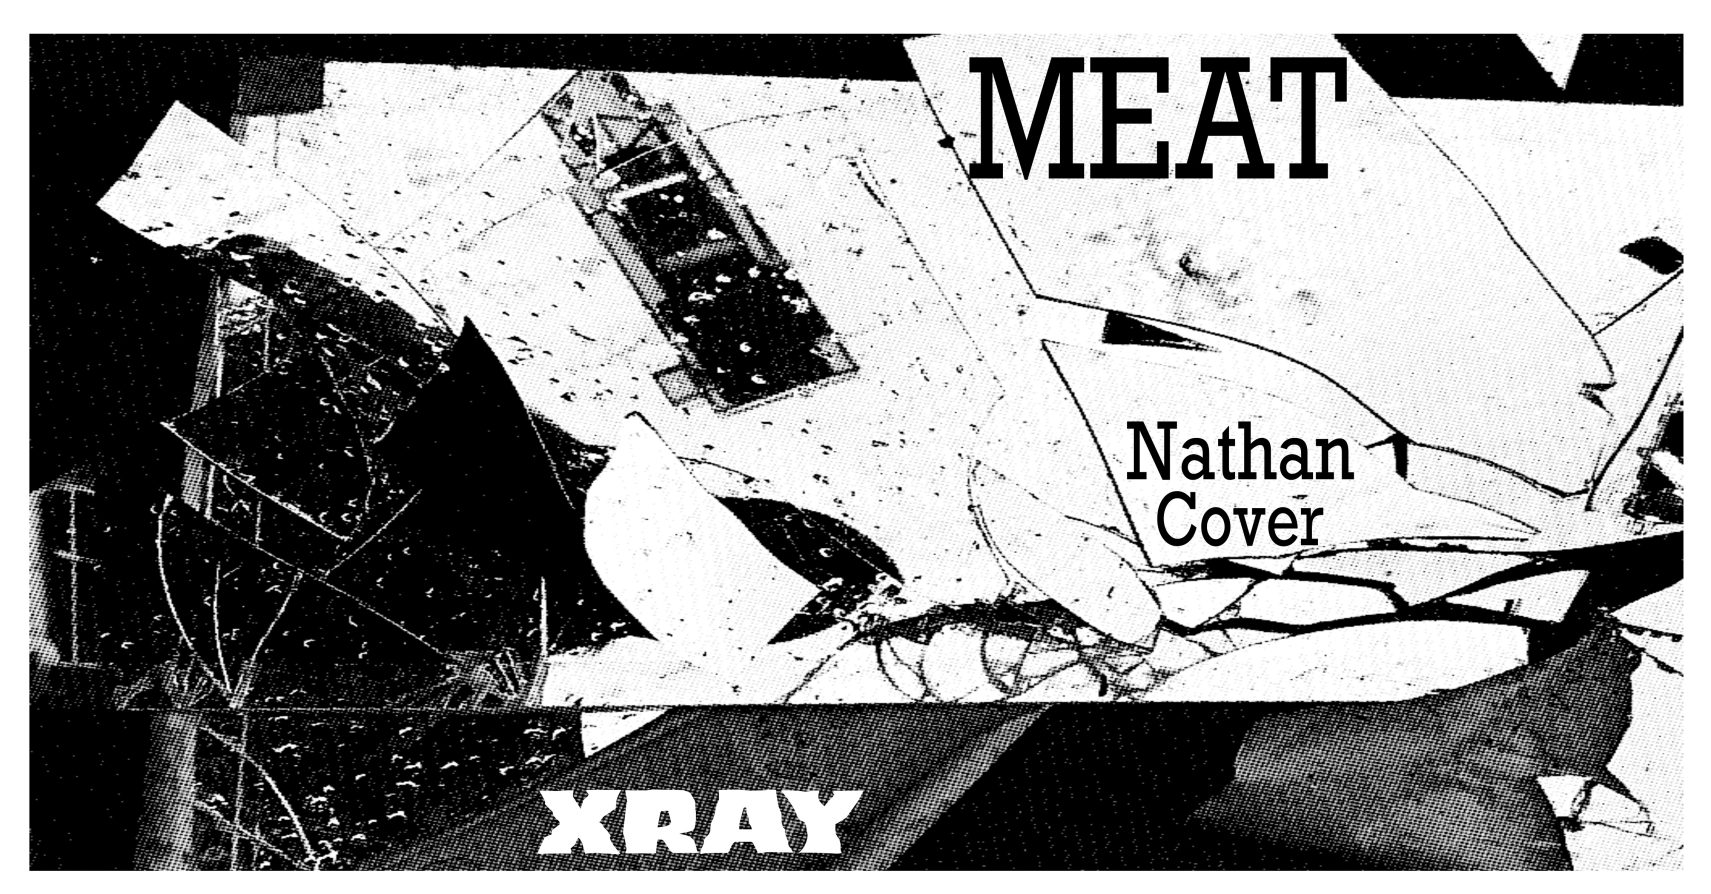 MEAT by Nathan Cover